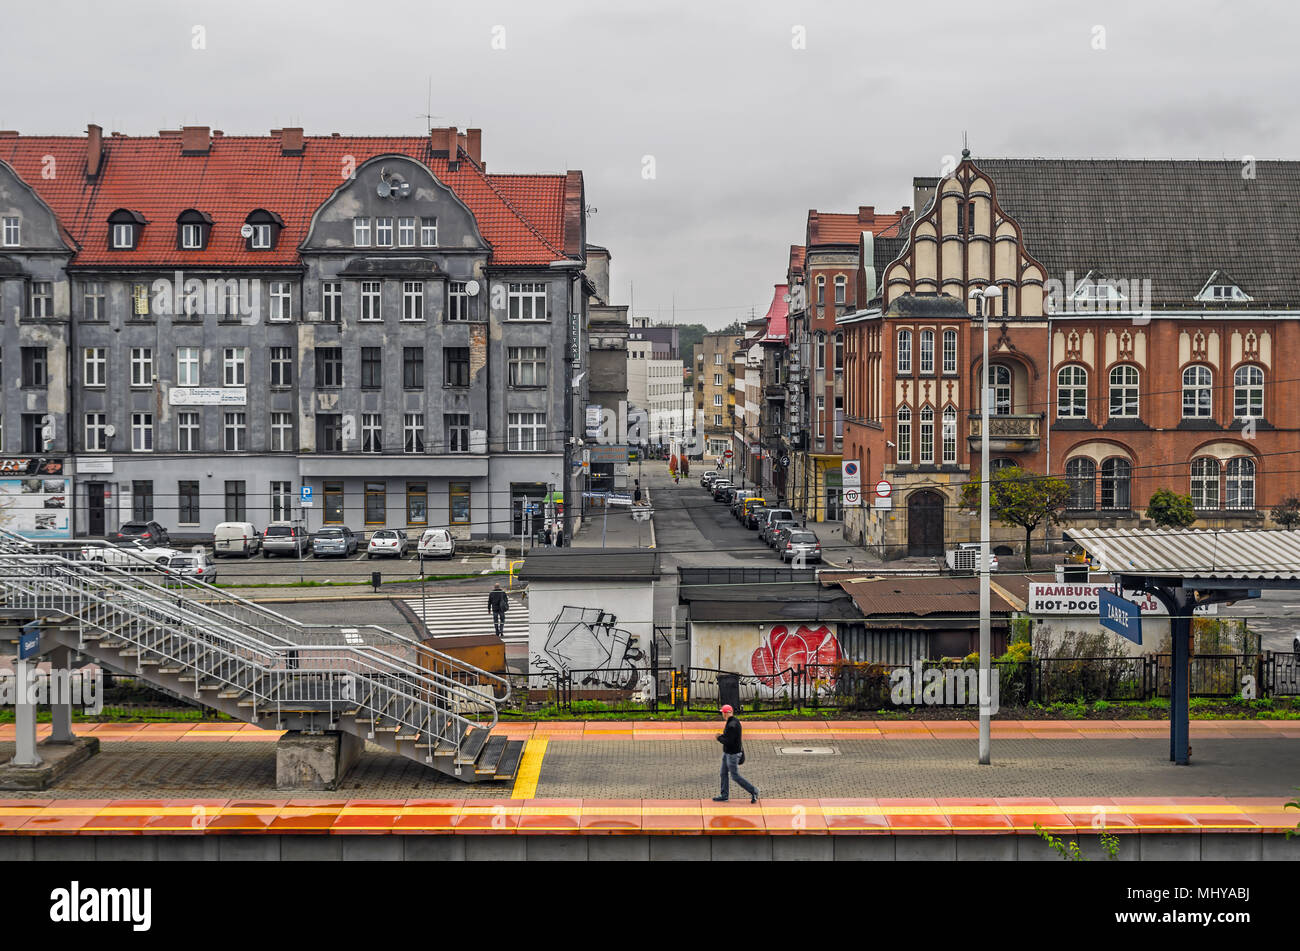 Historical center of Zabrze town with antique buildings and train platform in Zabrze, Silesian Upland, Poland. Stock Photo